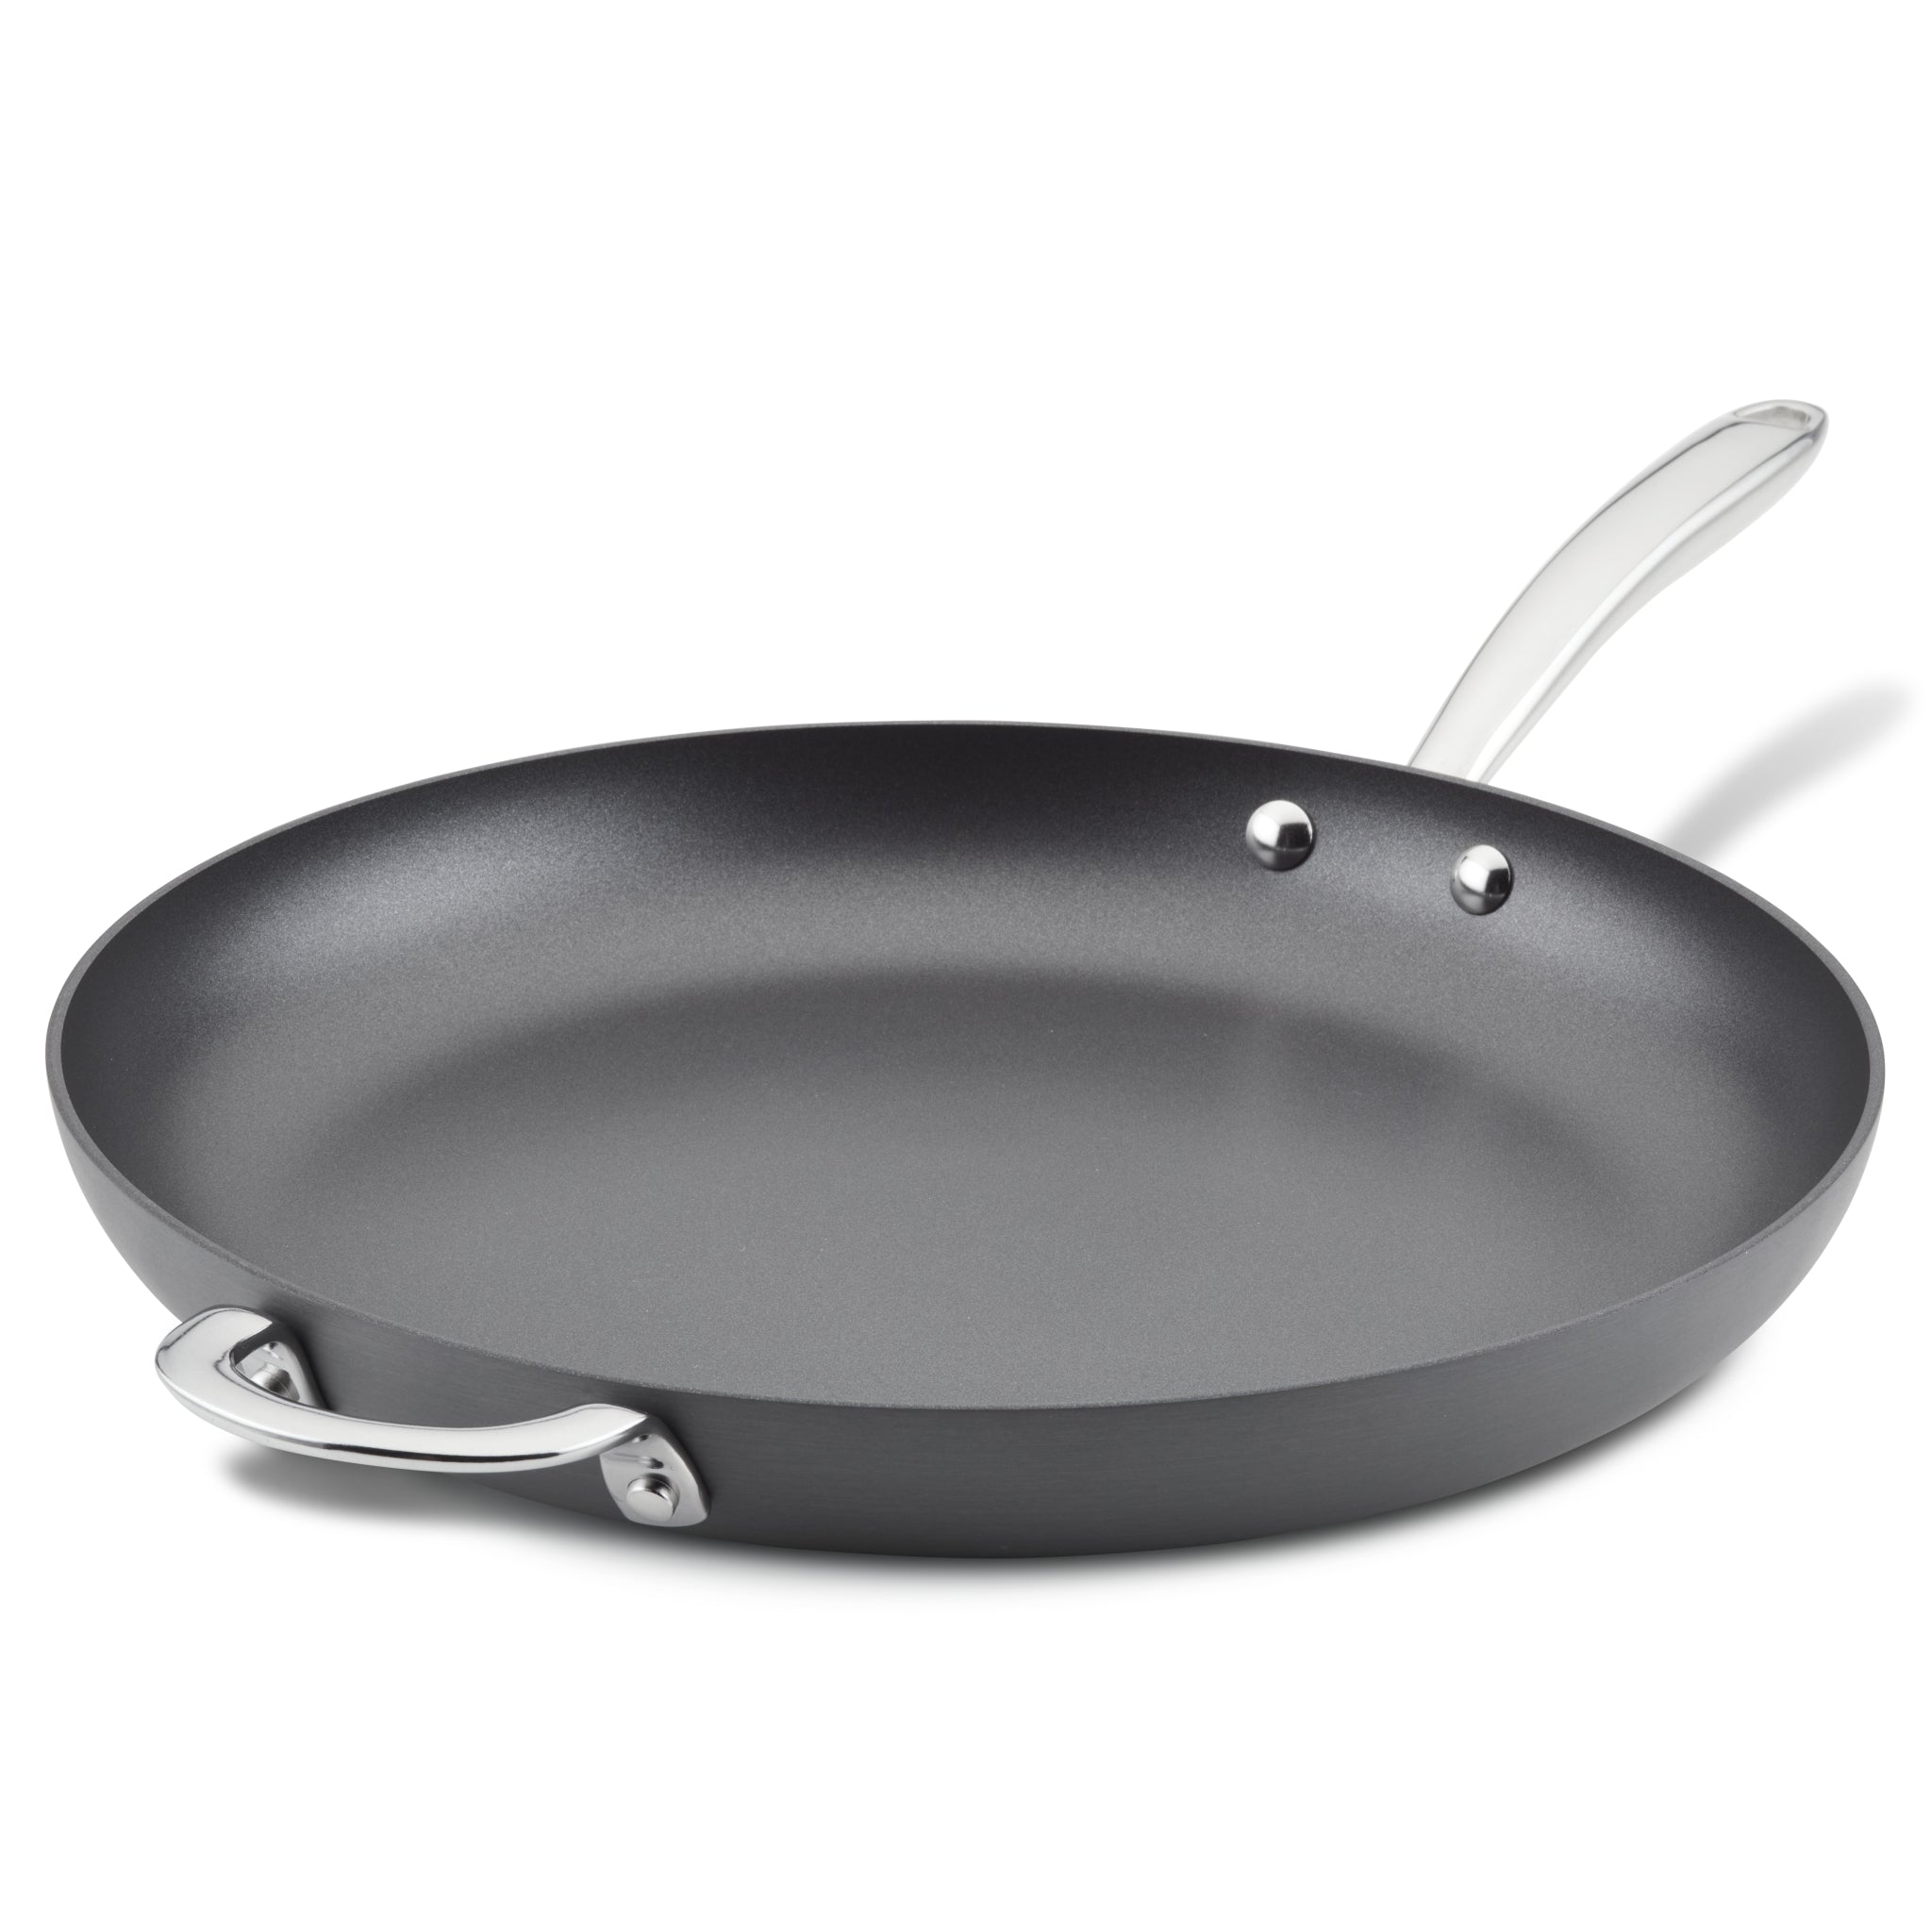 Create Delicious 10.25-Inch Covered Induction Deep Skillet – Rachael Ray